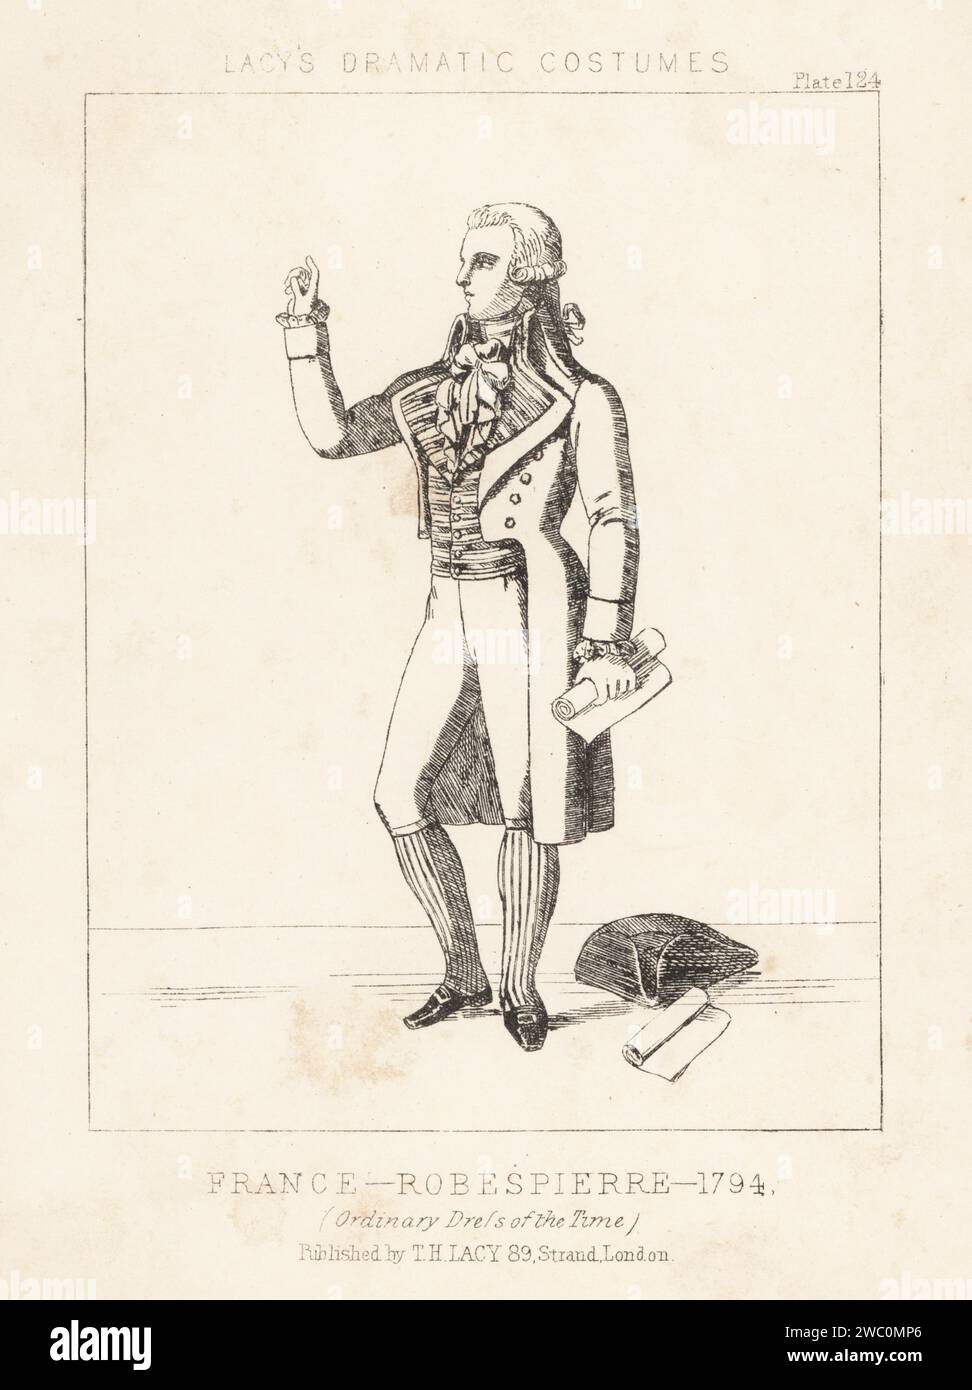 Maximilien Robespierre, lawyer and statesman during the Reign of Terror in Revolutionary France, 1794. Ordinary dress of the time, riding coat, breeches and hose, buckle shoes, with tricorne and scroll. Lithograph from Thomas Hailes Lacy's Male Costumes, Historical, National and Dramatic in 200 Plates, London, 1865. Lacy (1809-1873) was a British actor, playwright, theatrical manager and publisher. Stock Photo